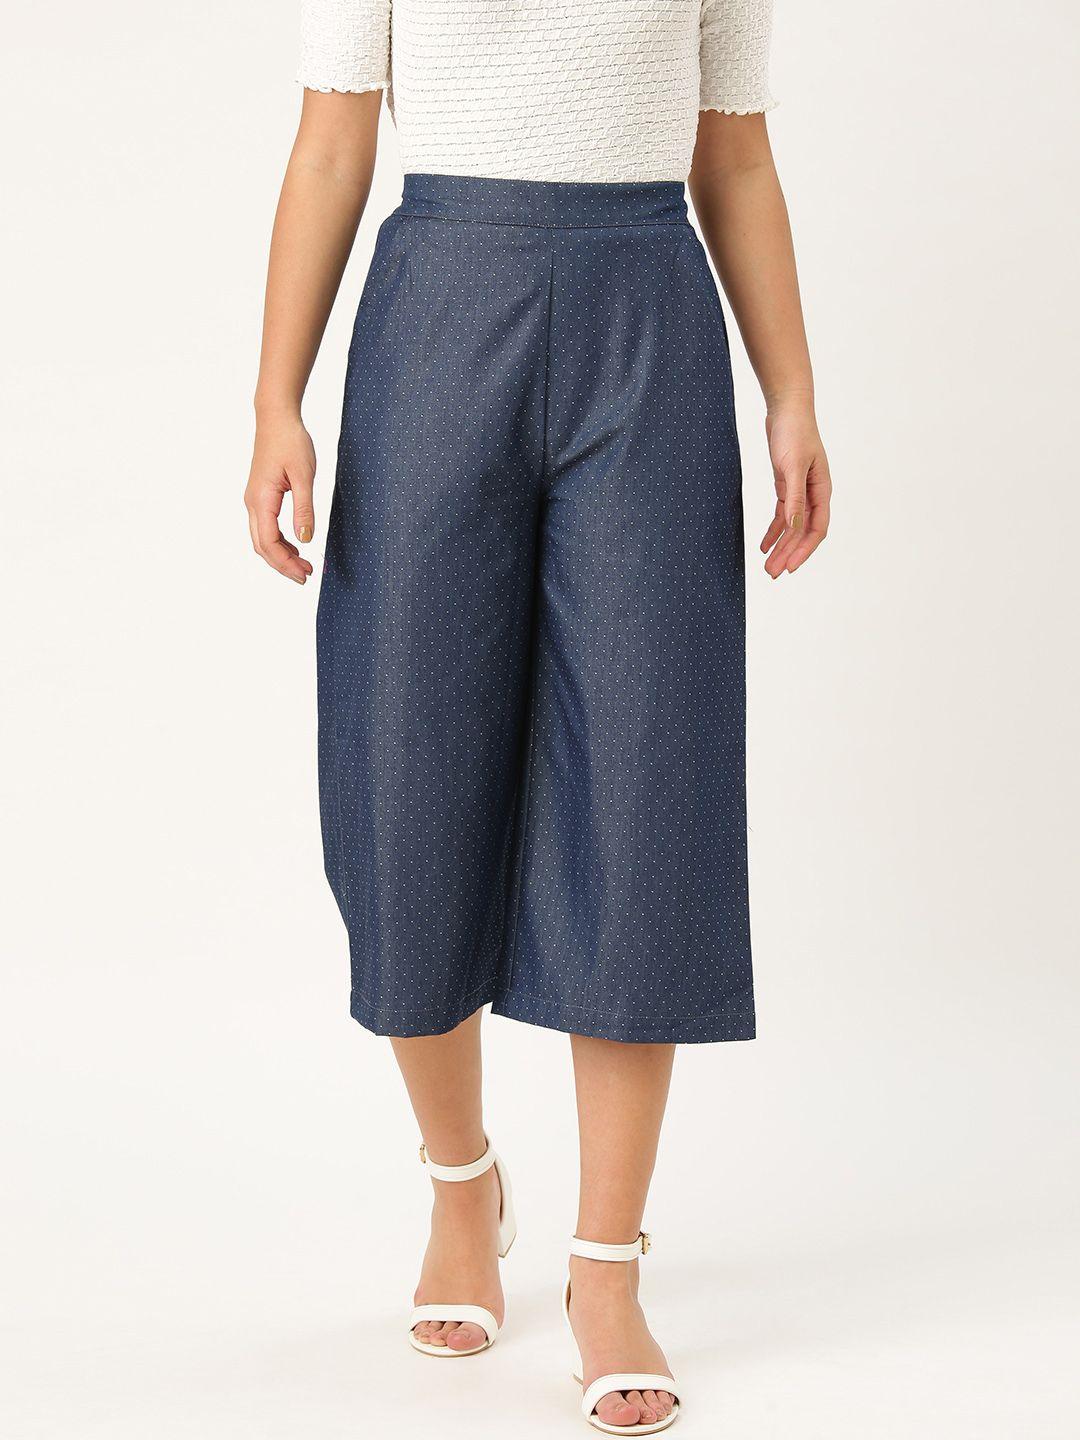 style-quotient-women-navy-blue-&-white-relaxed-loose-fit-chambray-self-design-culottes